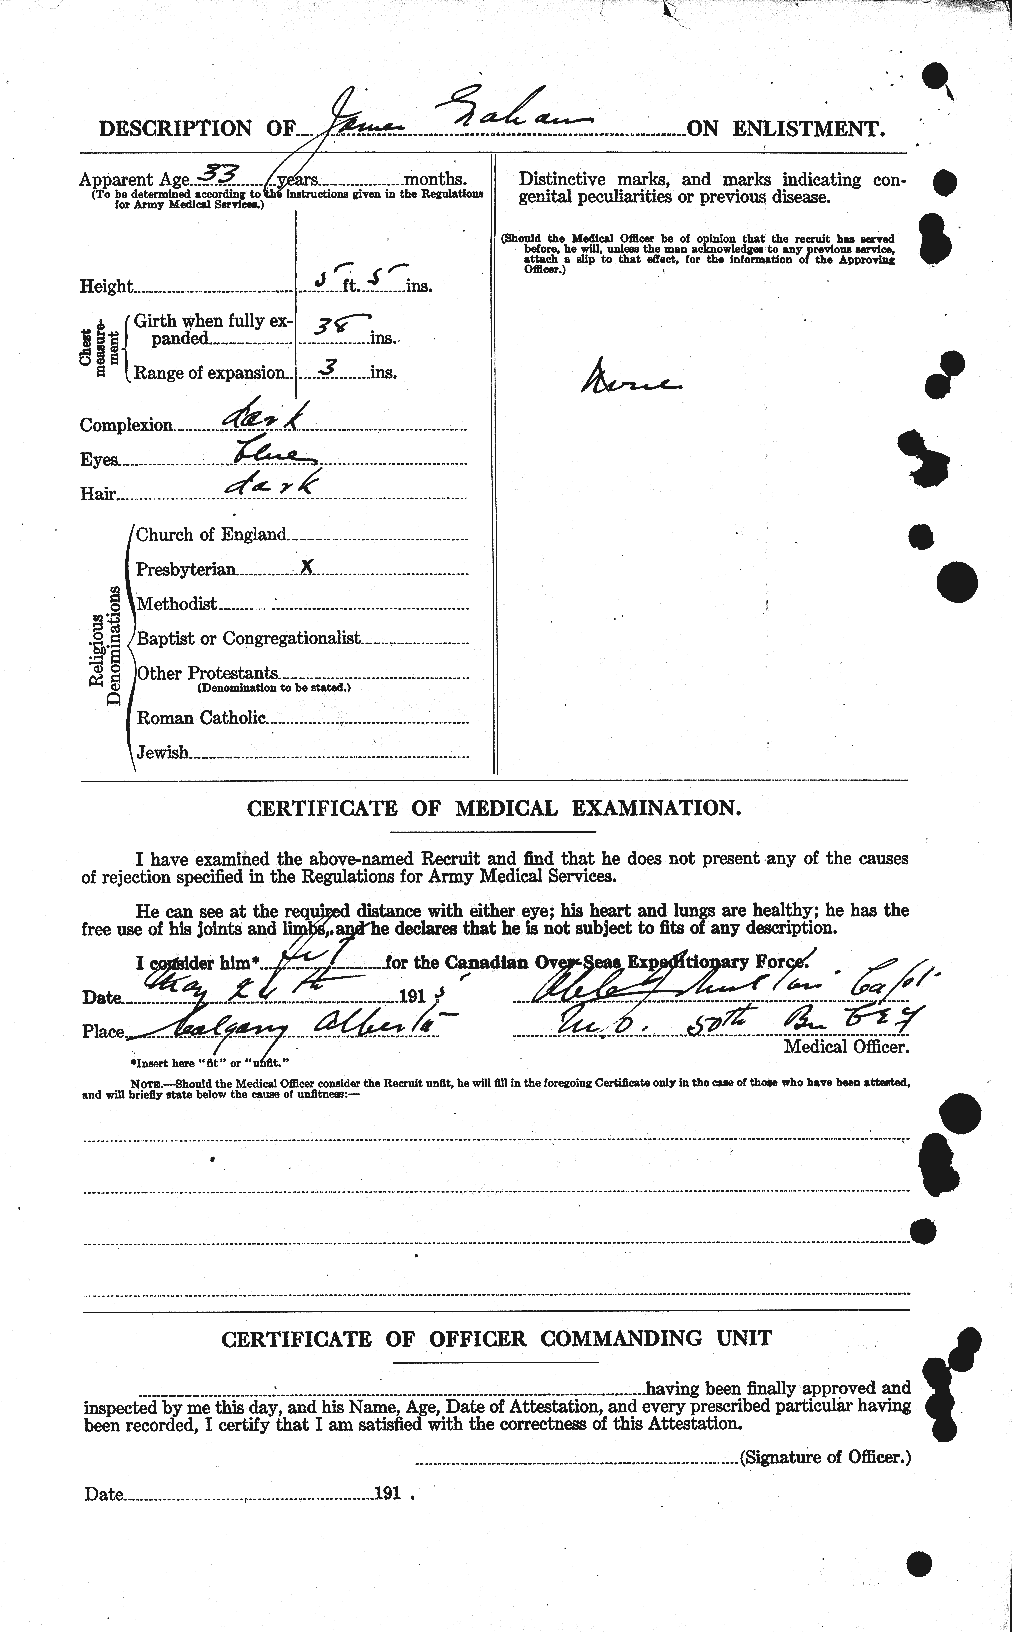 Personnel Records of the First World War - CEF 357791b